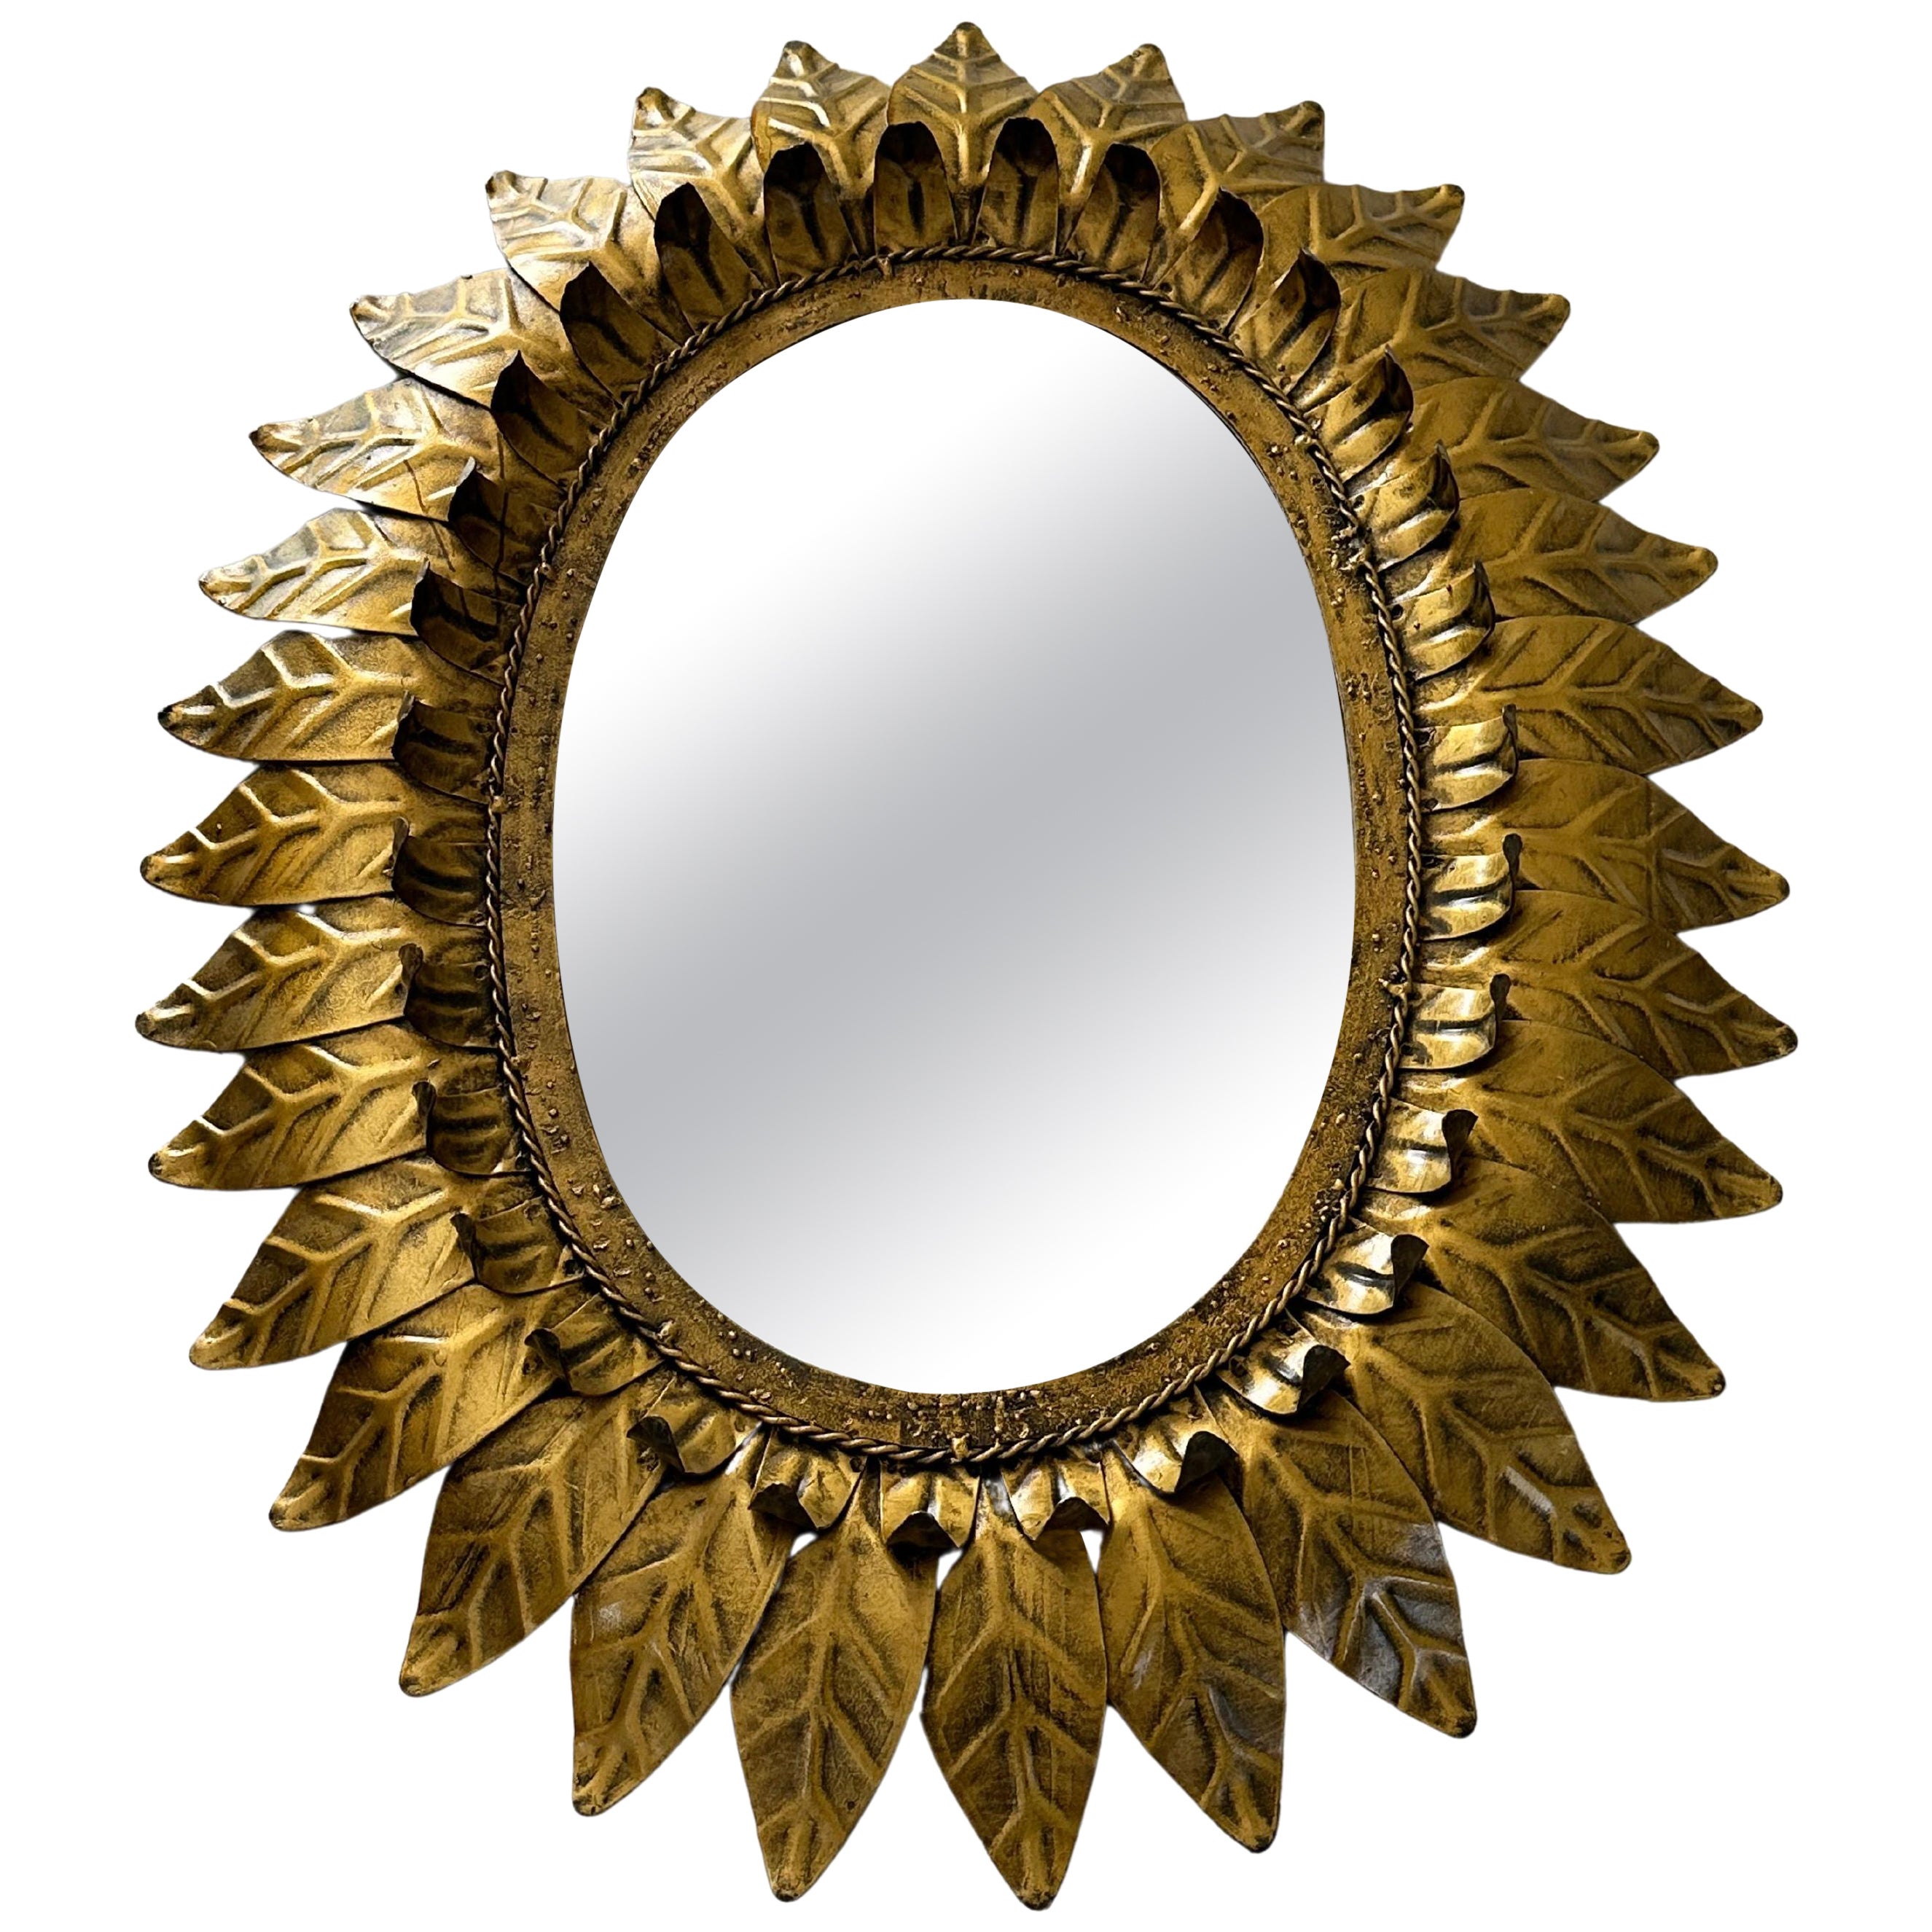 Large oval sunburst mirror, framed with gold-colored metal leaves, Spain 1960